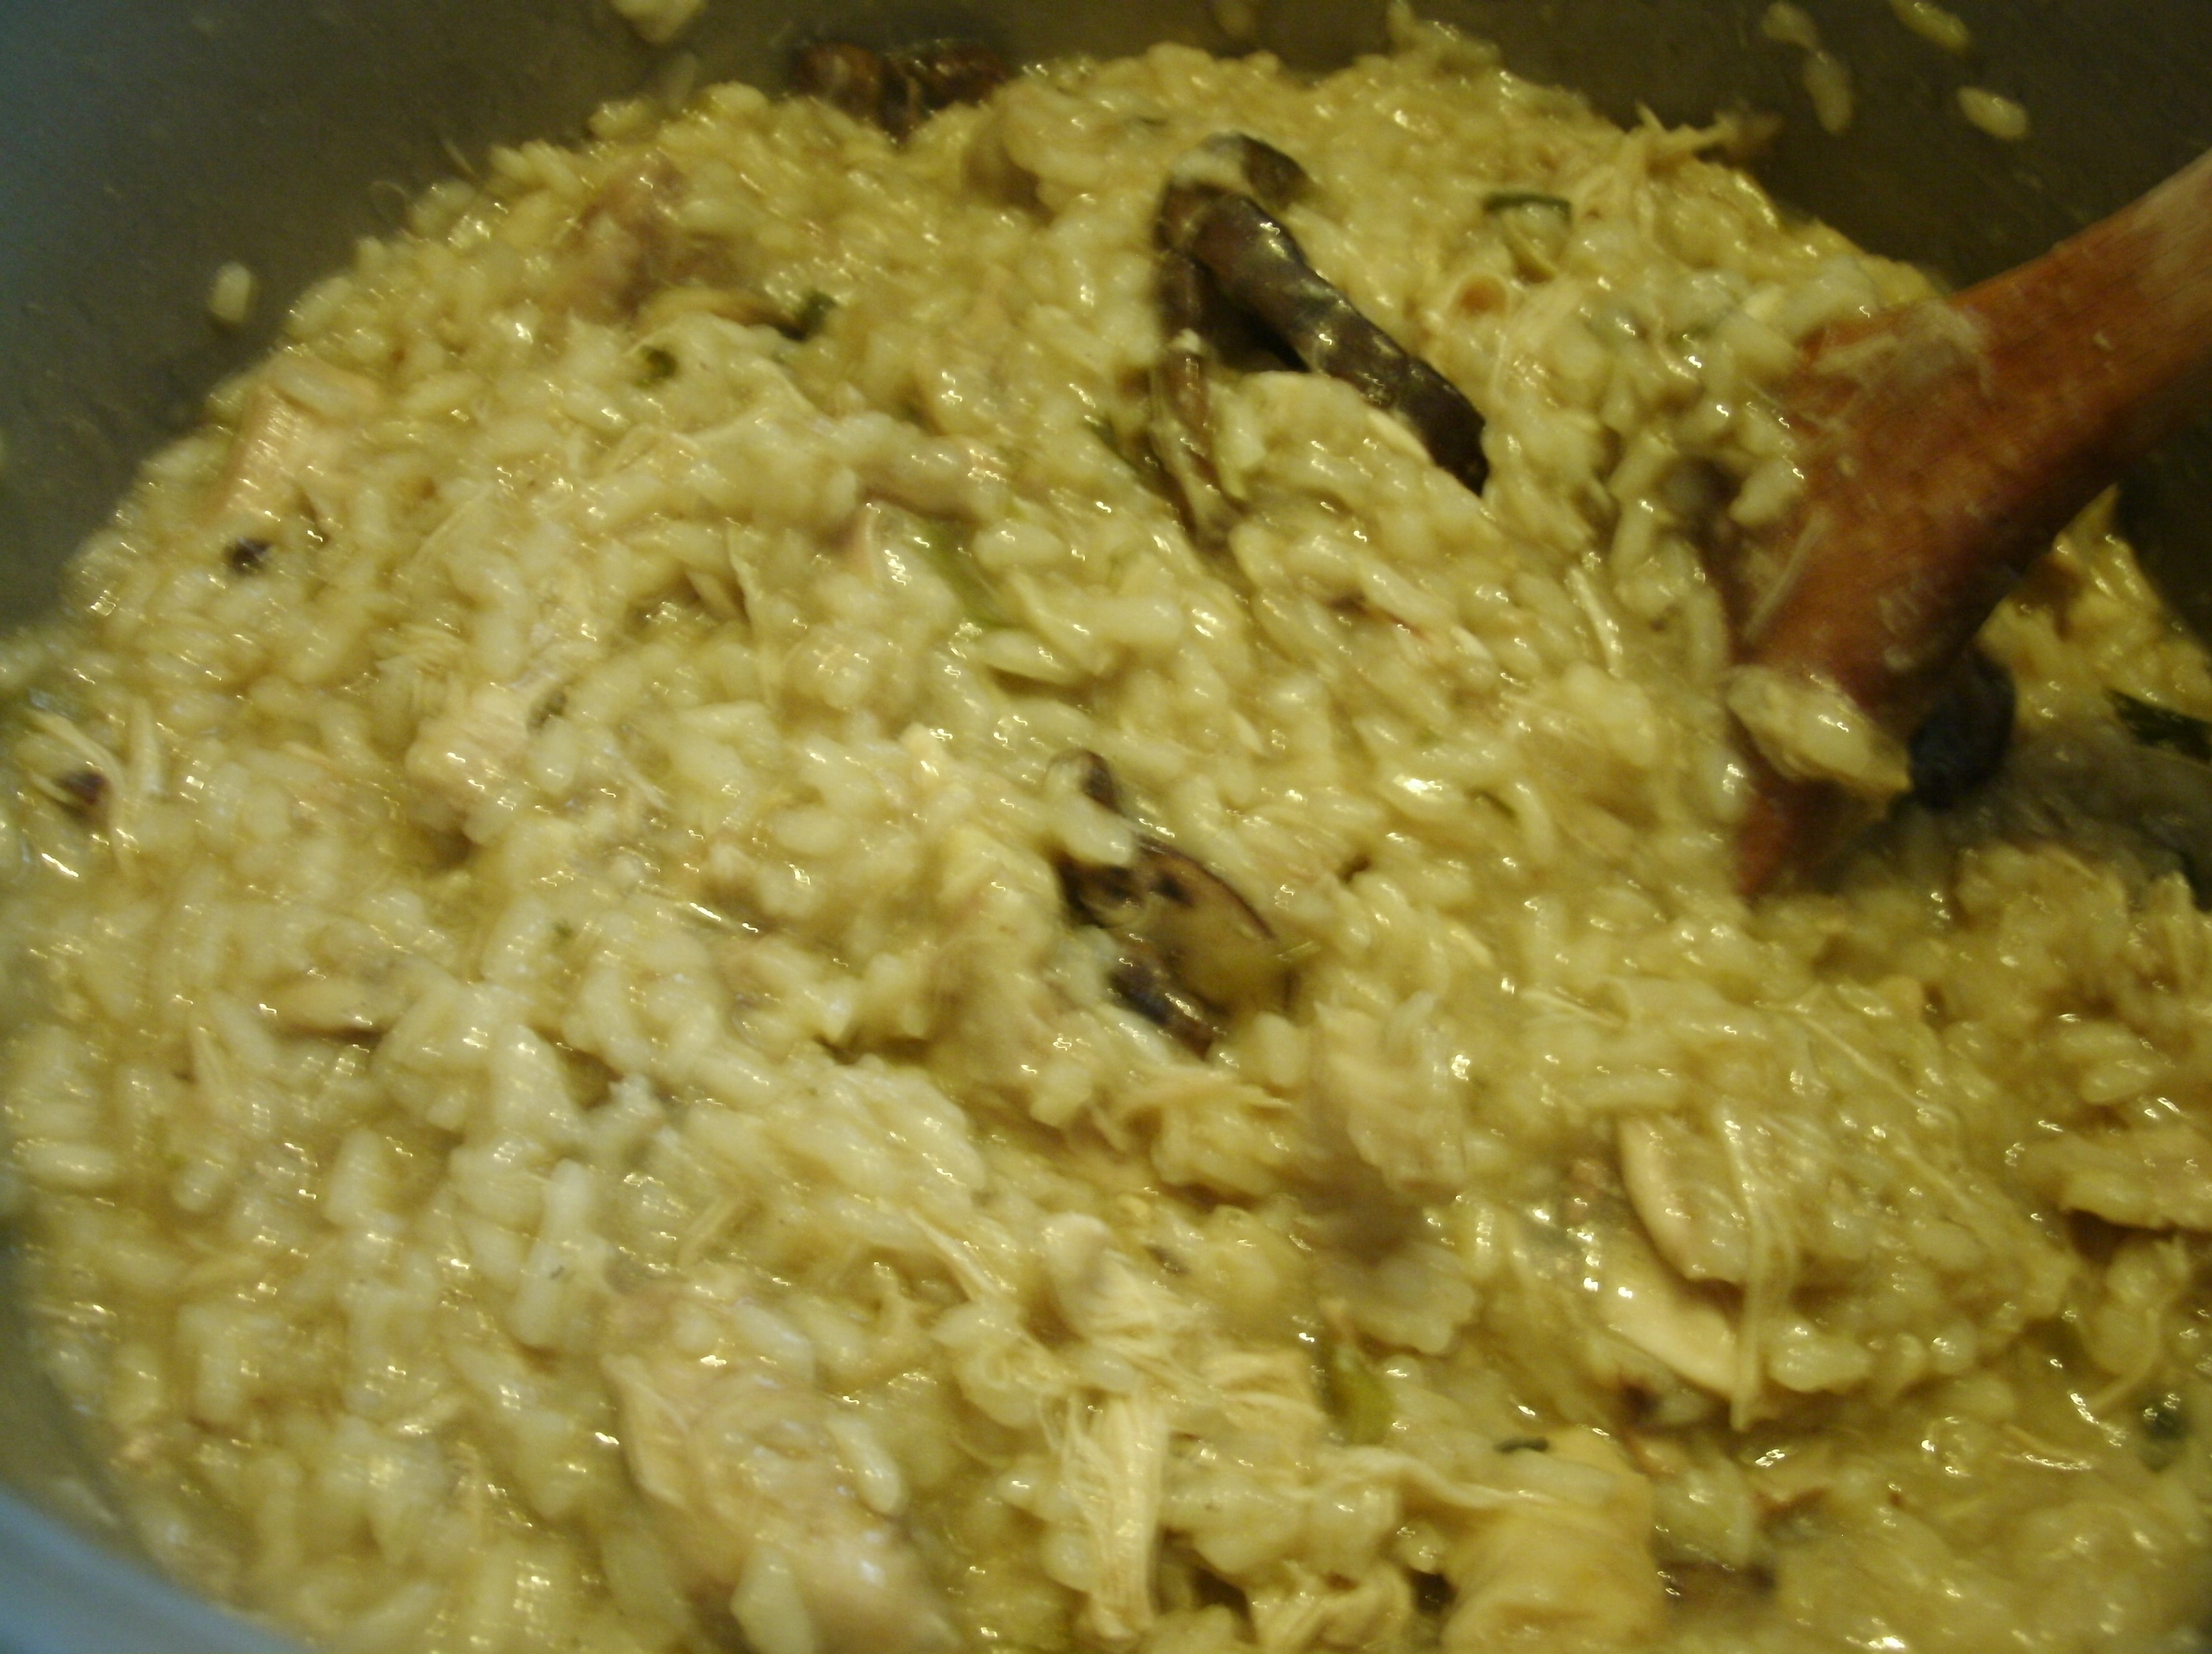 finished risotto